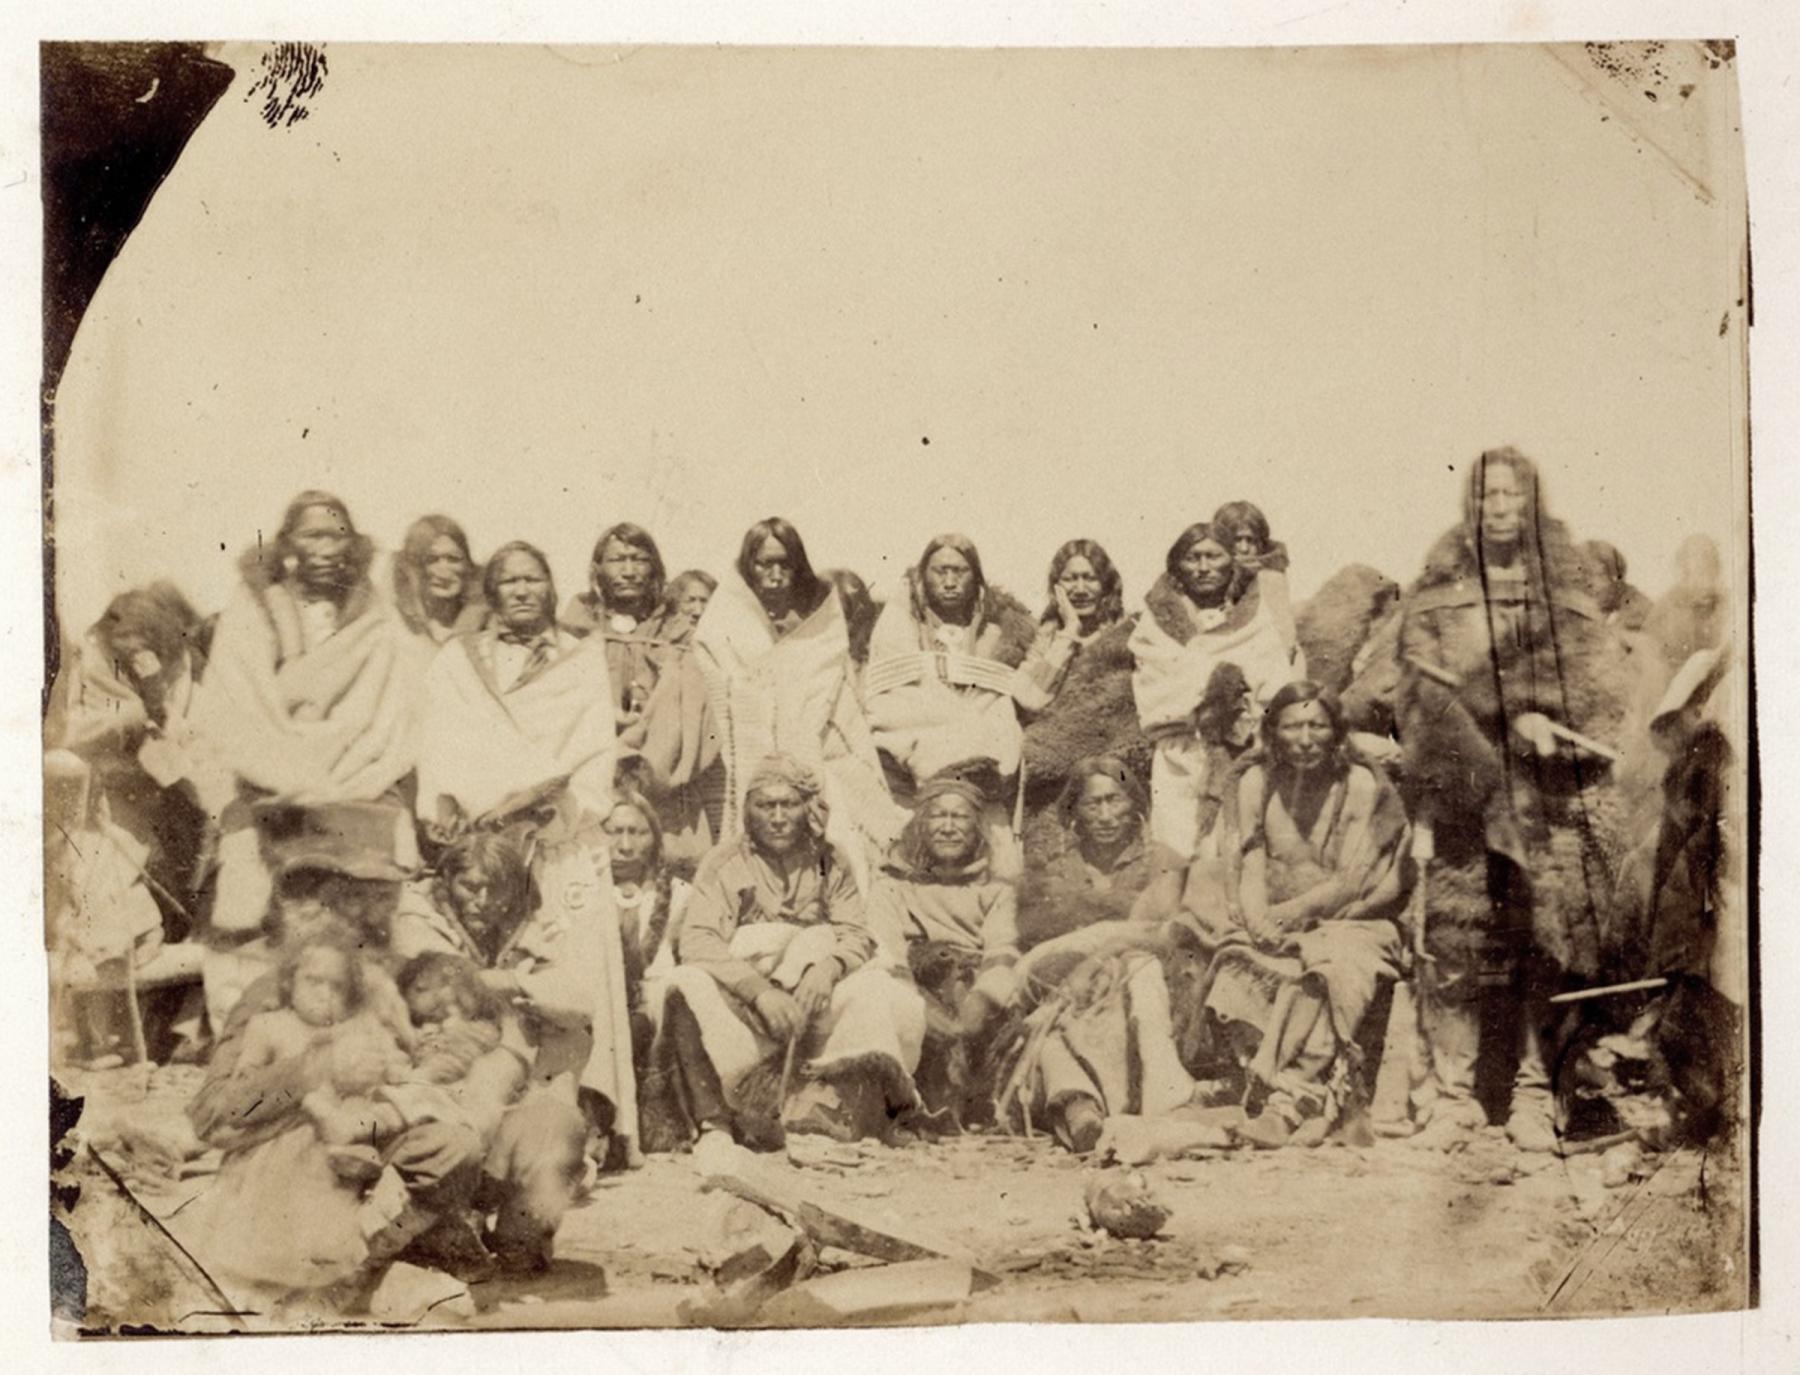 A group of Arapaho men and children, including Chief Friday, standing third from left. The white man in the top hat, seated at bottom left, may well be Maj. Thomas Twiss, U.S. agent to the tribes of the Upper Platte. If so, the two small children could be two of his three Lakota children, perhaps Charles and James, born about 1858. Photographed by James D. Hutton at Deer Creek, 1859. Blackmore Collection, British Museum. 